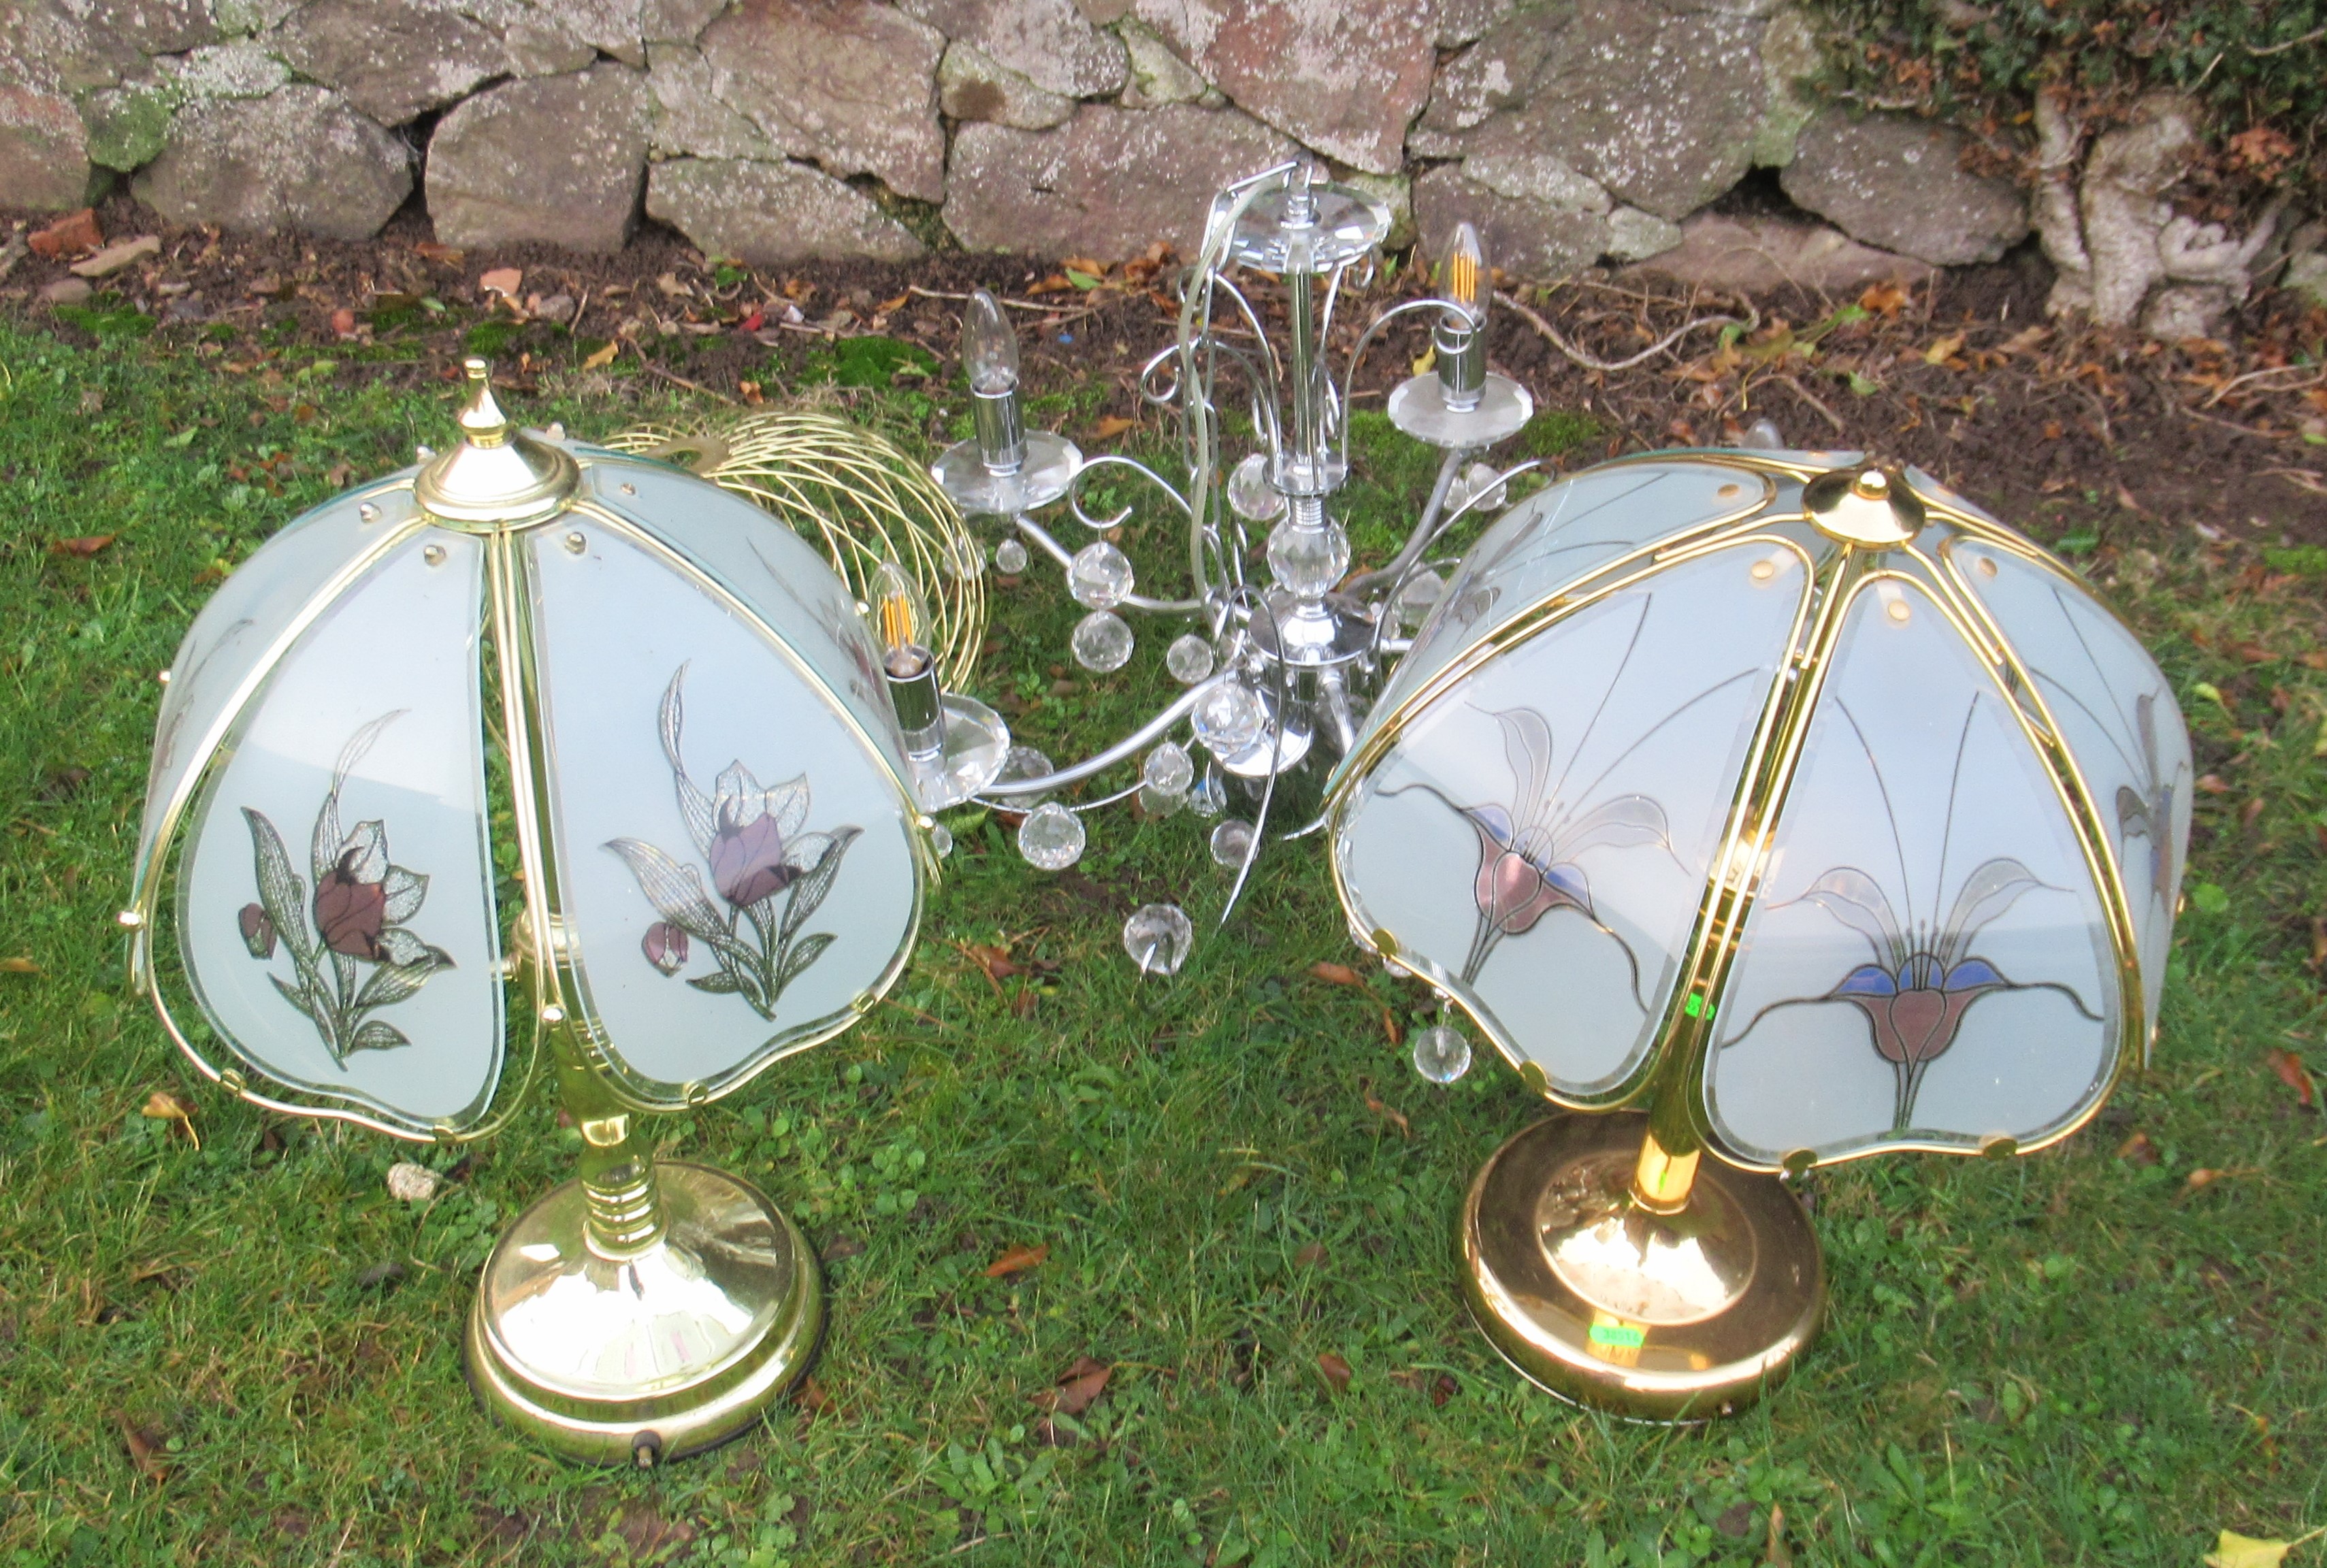 Two brass coloured table lamps, a chrome and glass hanging light fitting and a wire work shade